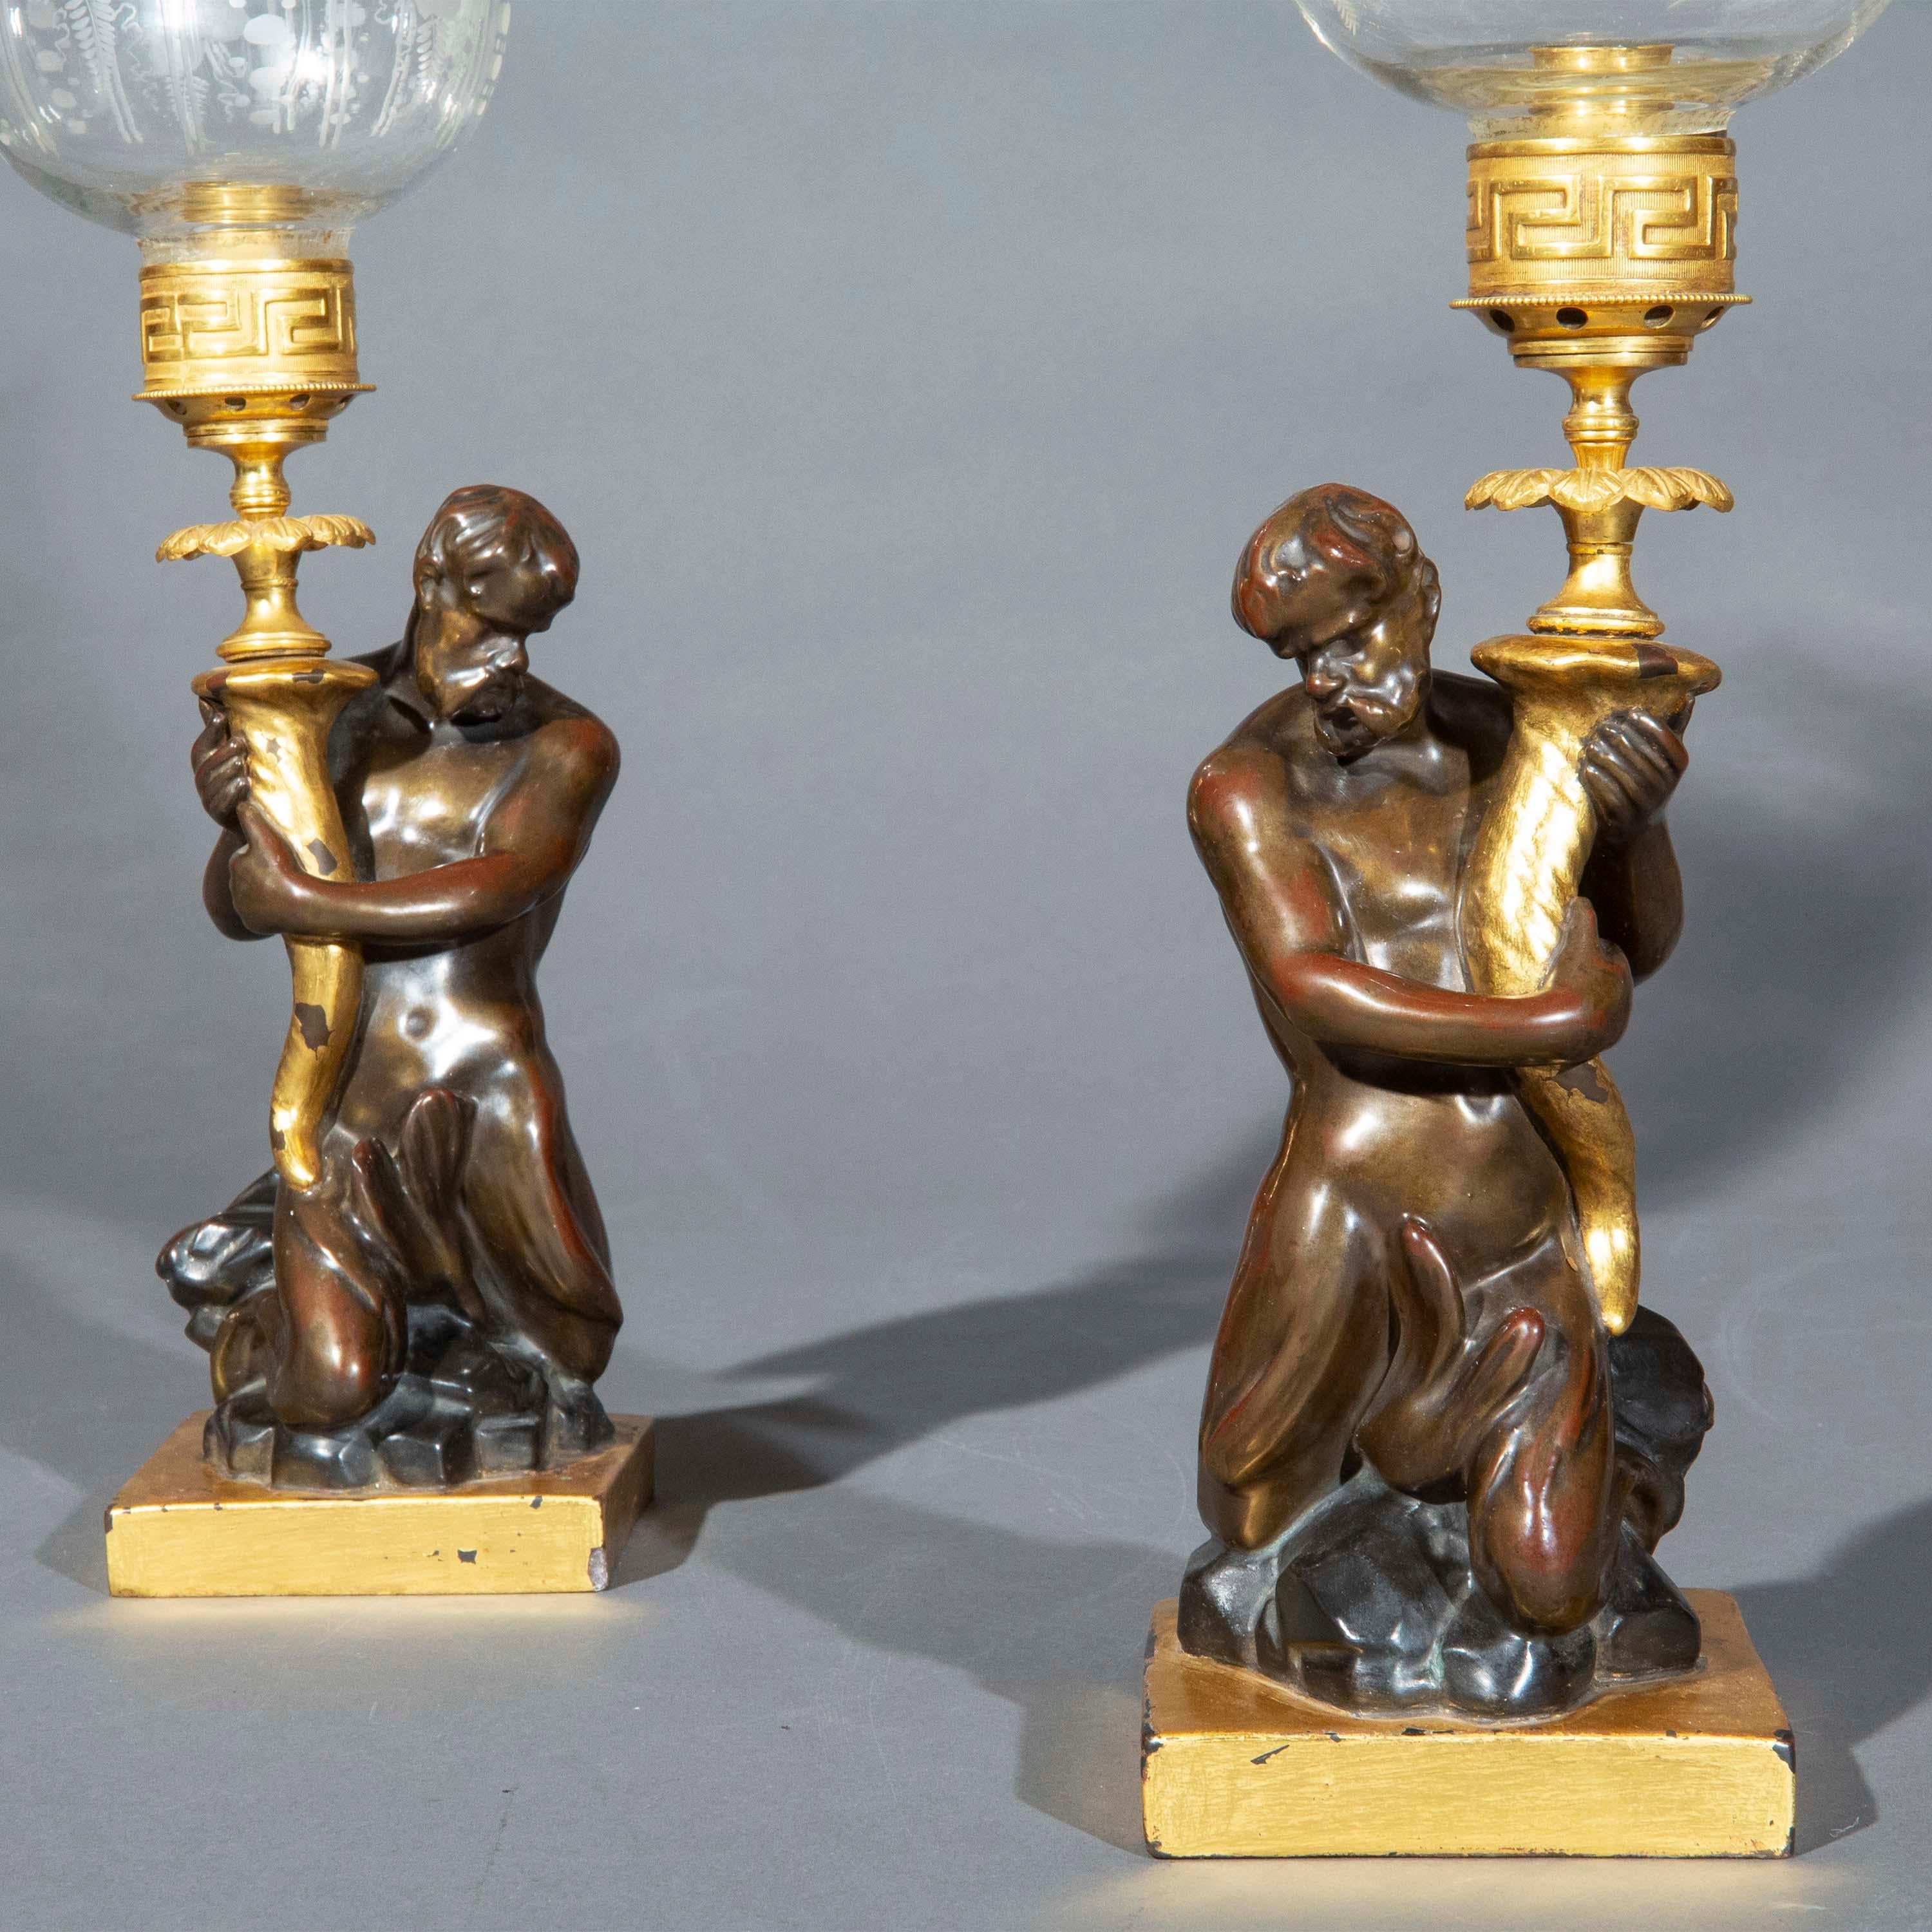 Pottery Pair of Early 19th Century Triton Candlesticks Storm Lanterns by Wood & Caldwell For Sale